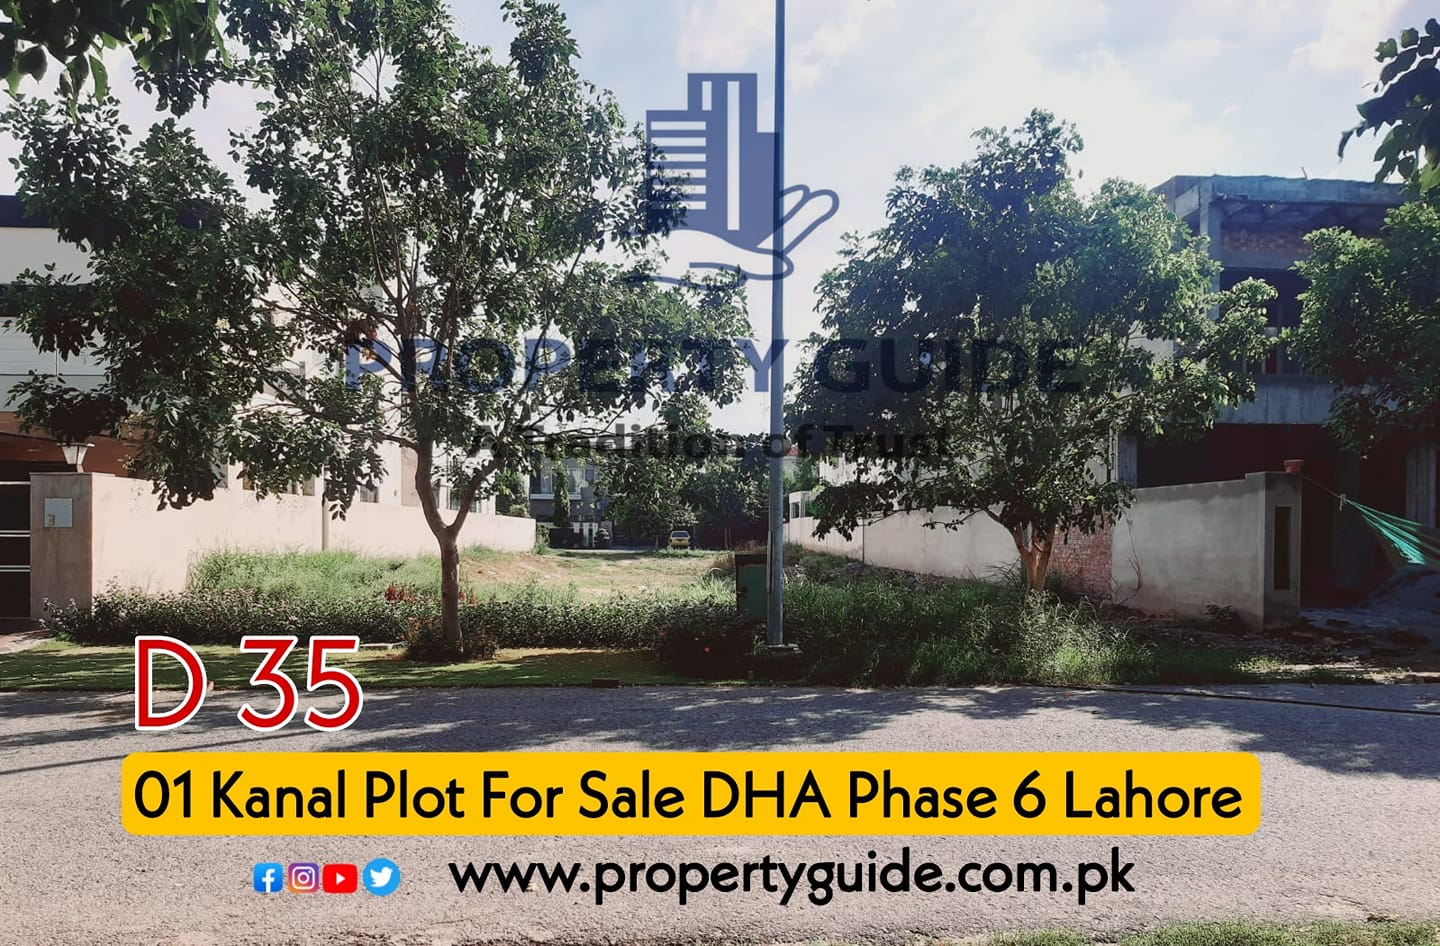 1 Kanal Plot For Sale In DHA Phase 6 Lahore